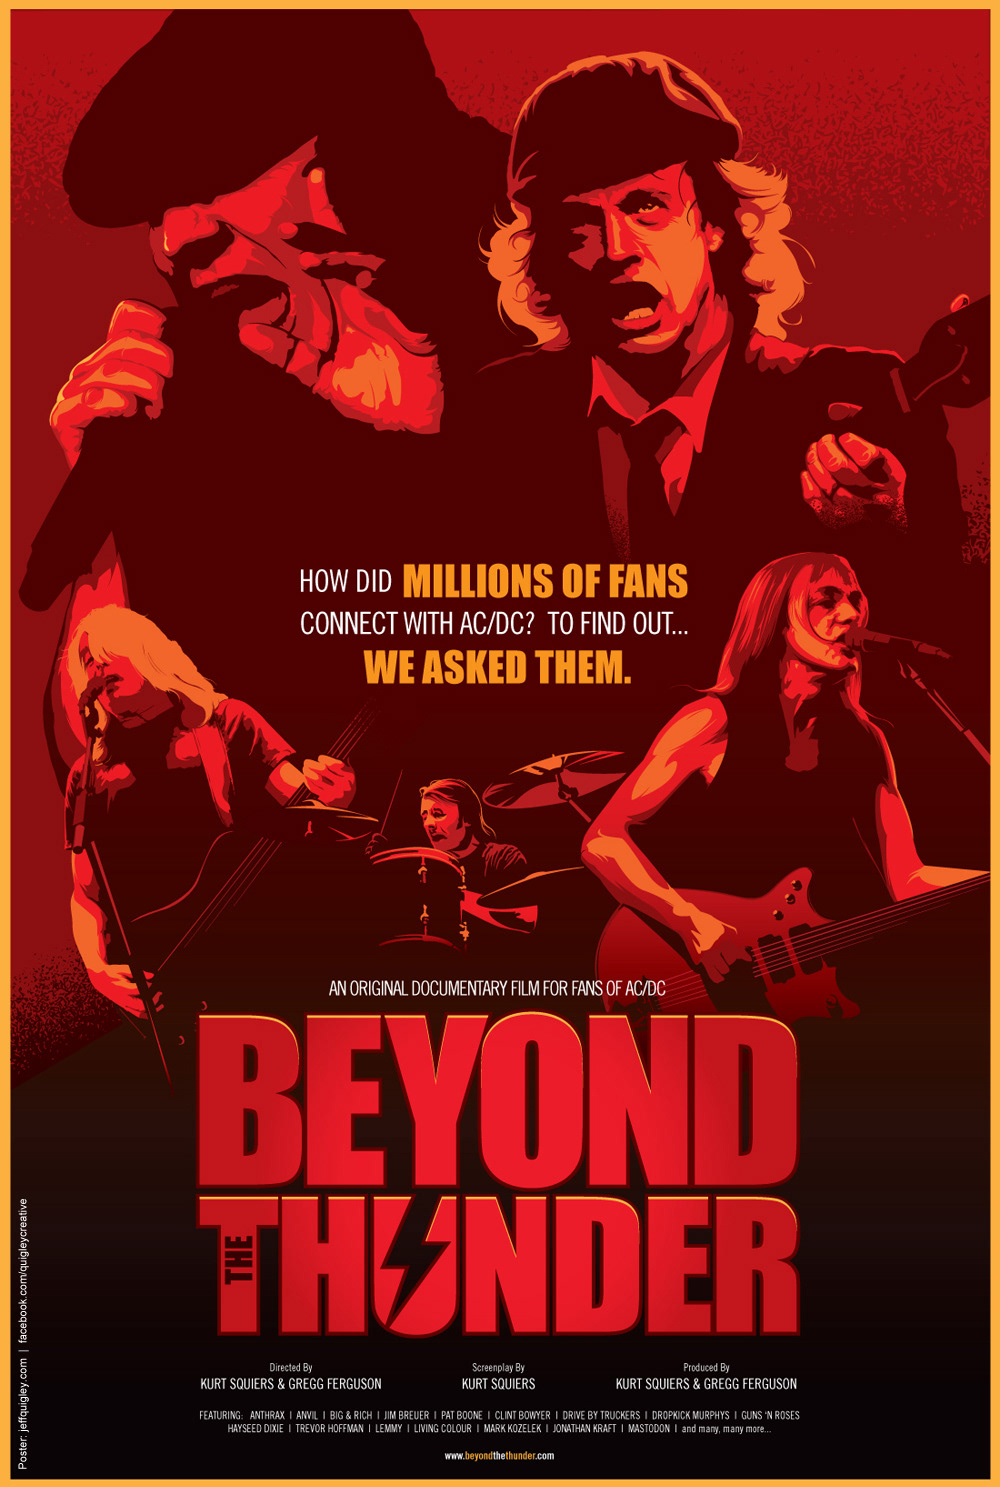 fort panik cabriolet AC/DC - Beyond The Thunder Movie Poster on Behance